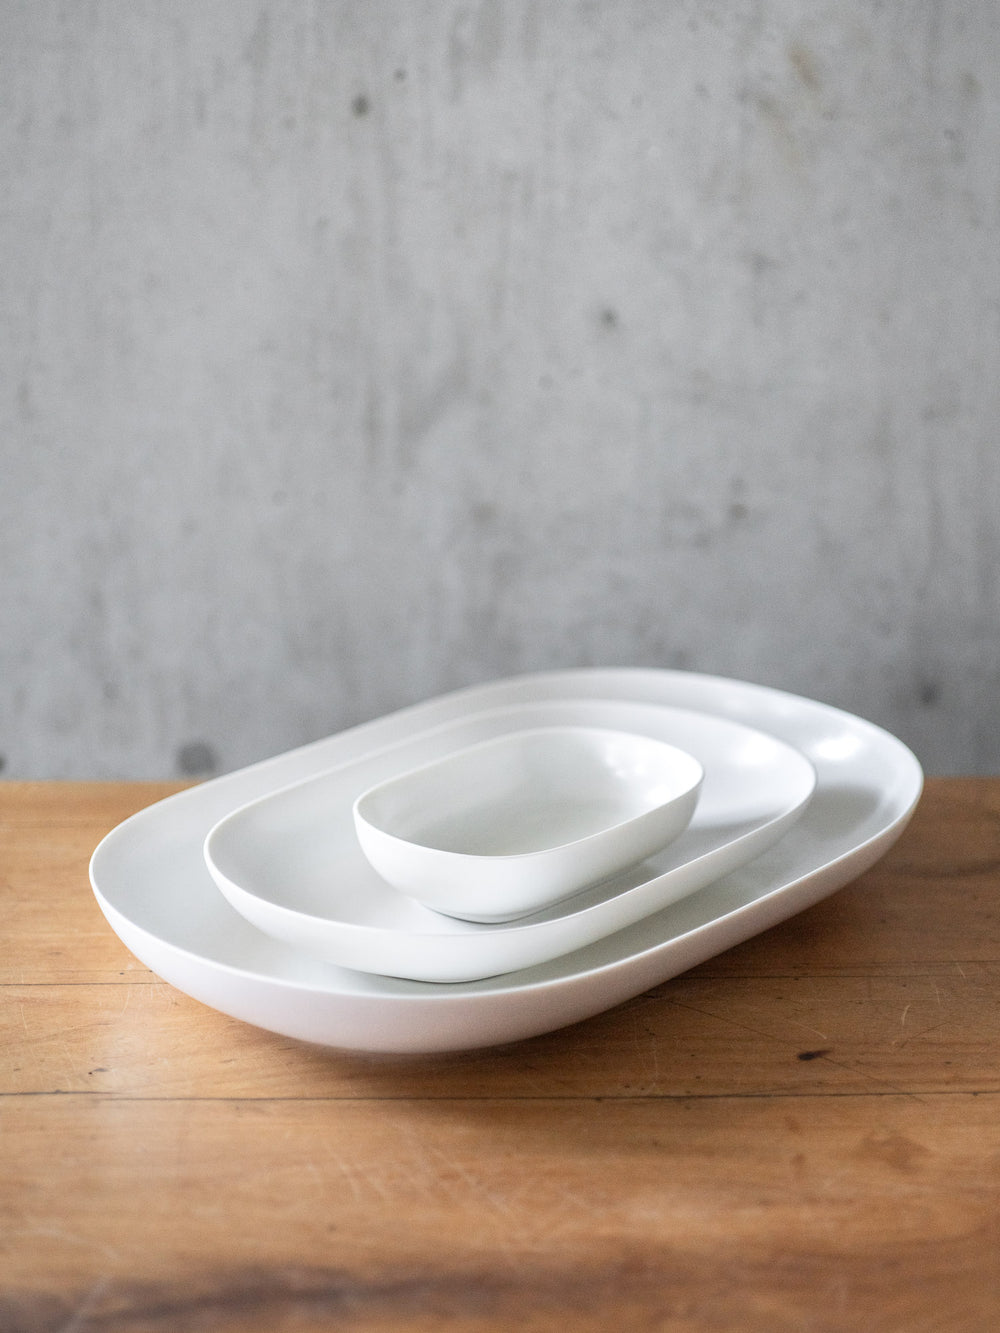 ReIRABO Oval Plate – Quiet White